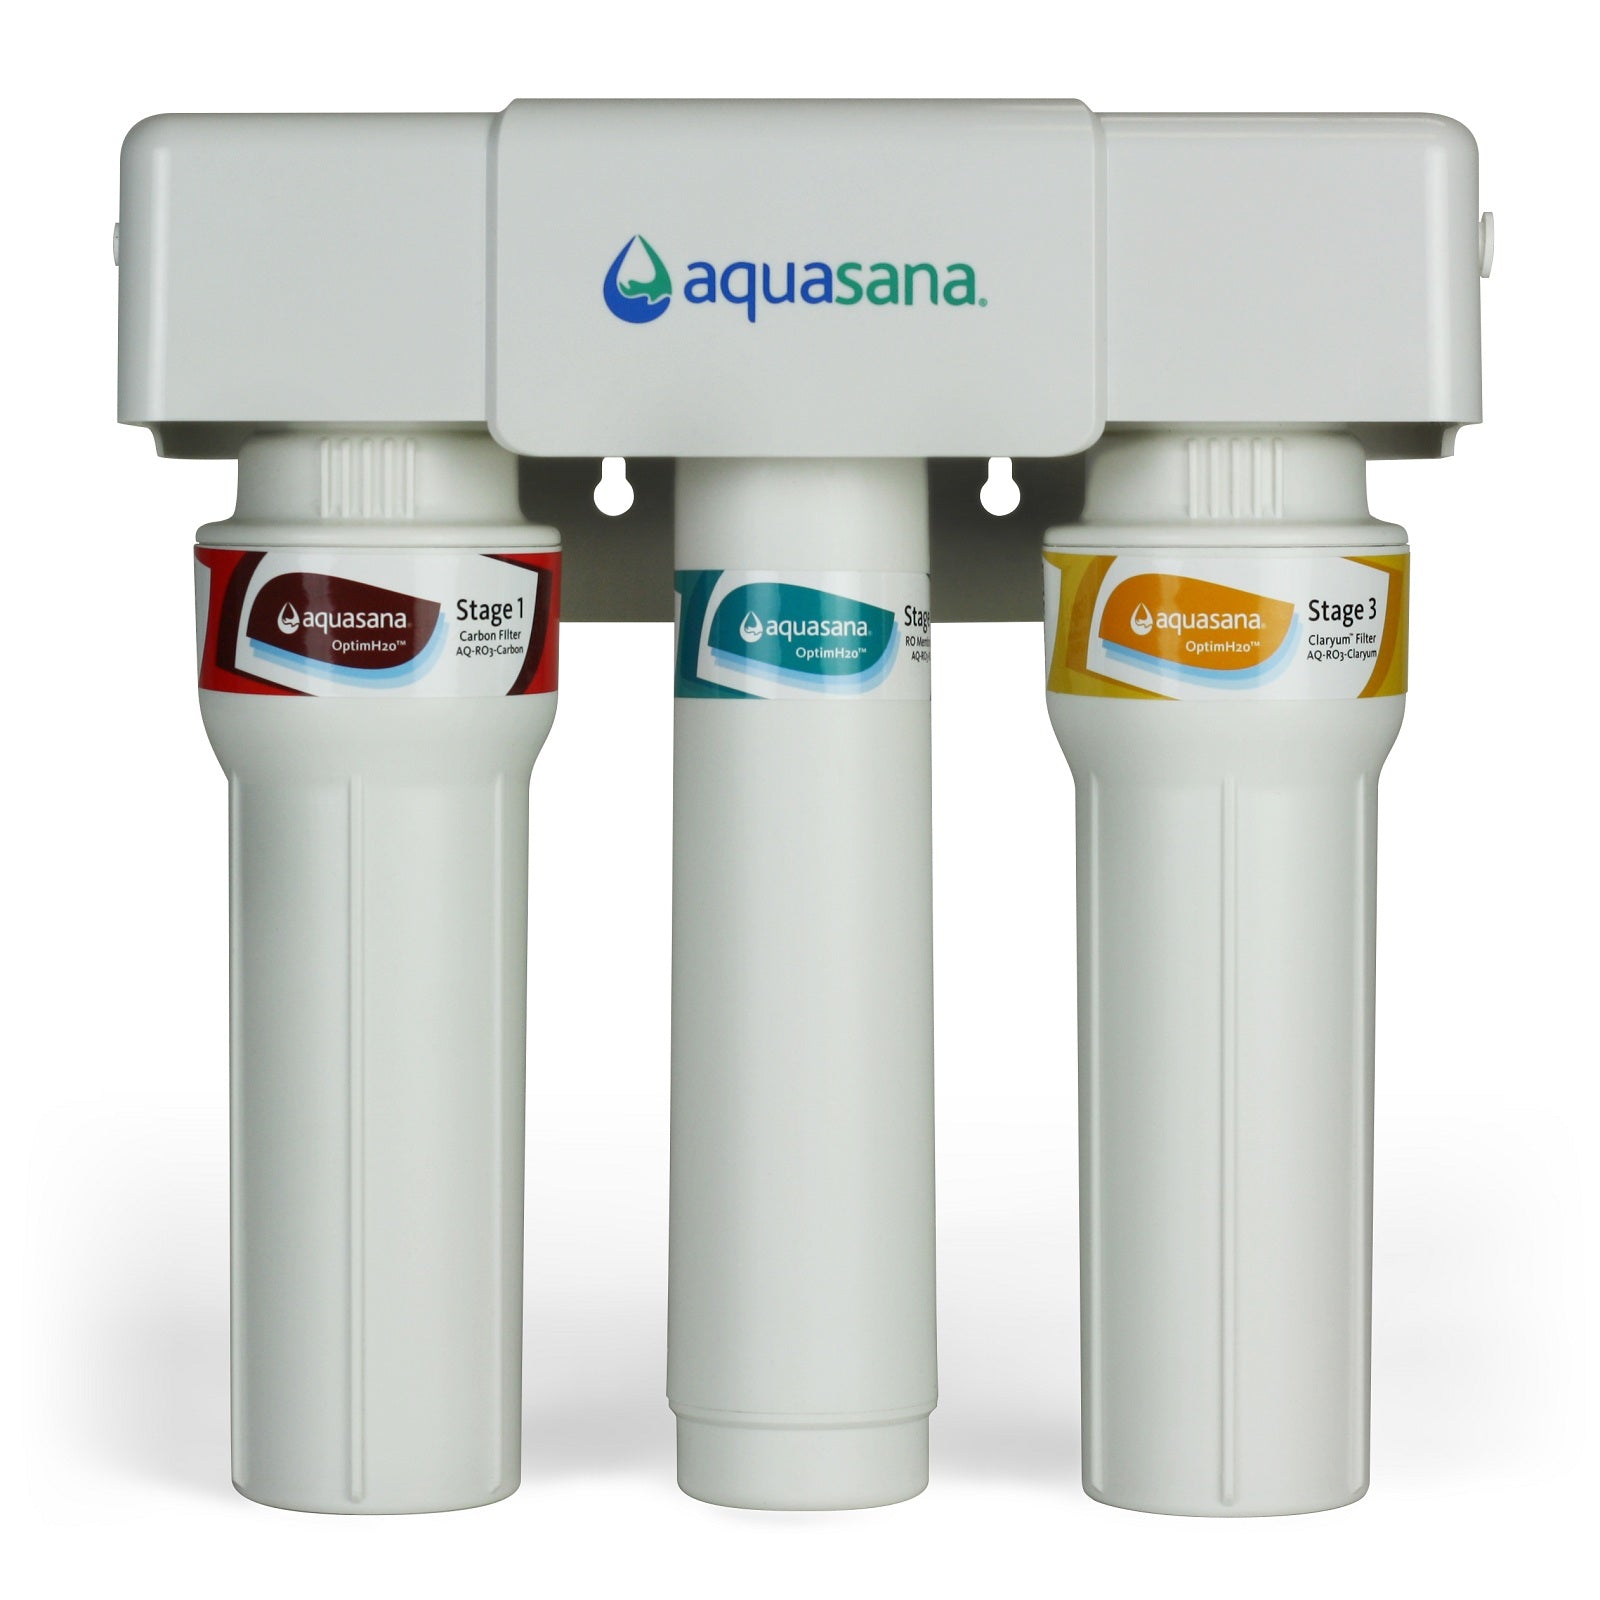 Aquasana OptimH2O Reverse Osmosis Water Filter System with Claryum Technology & Remineralisation Complete with Australian Fittings